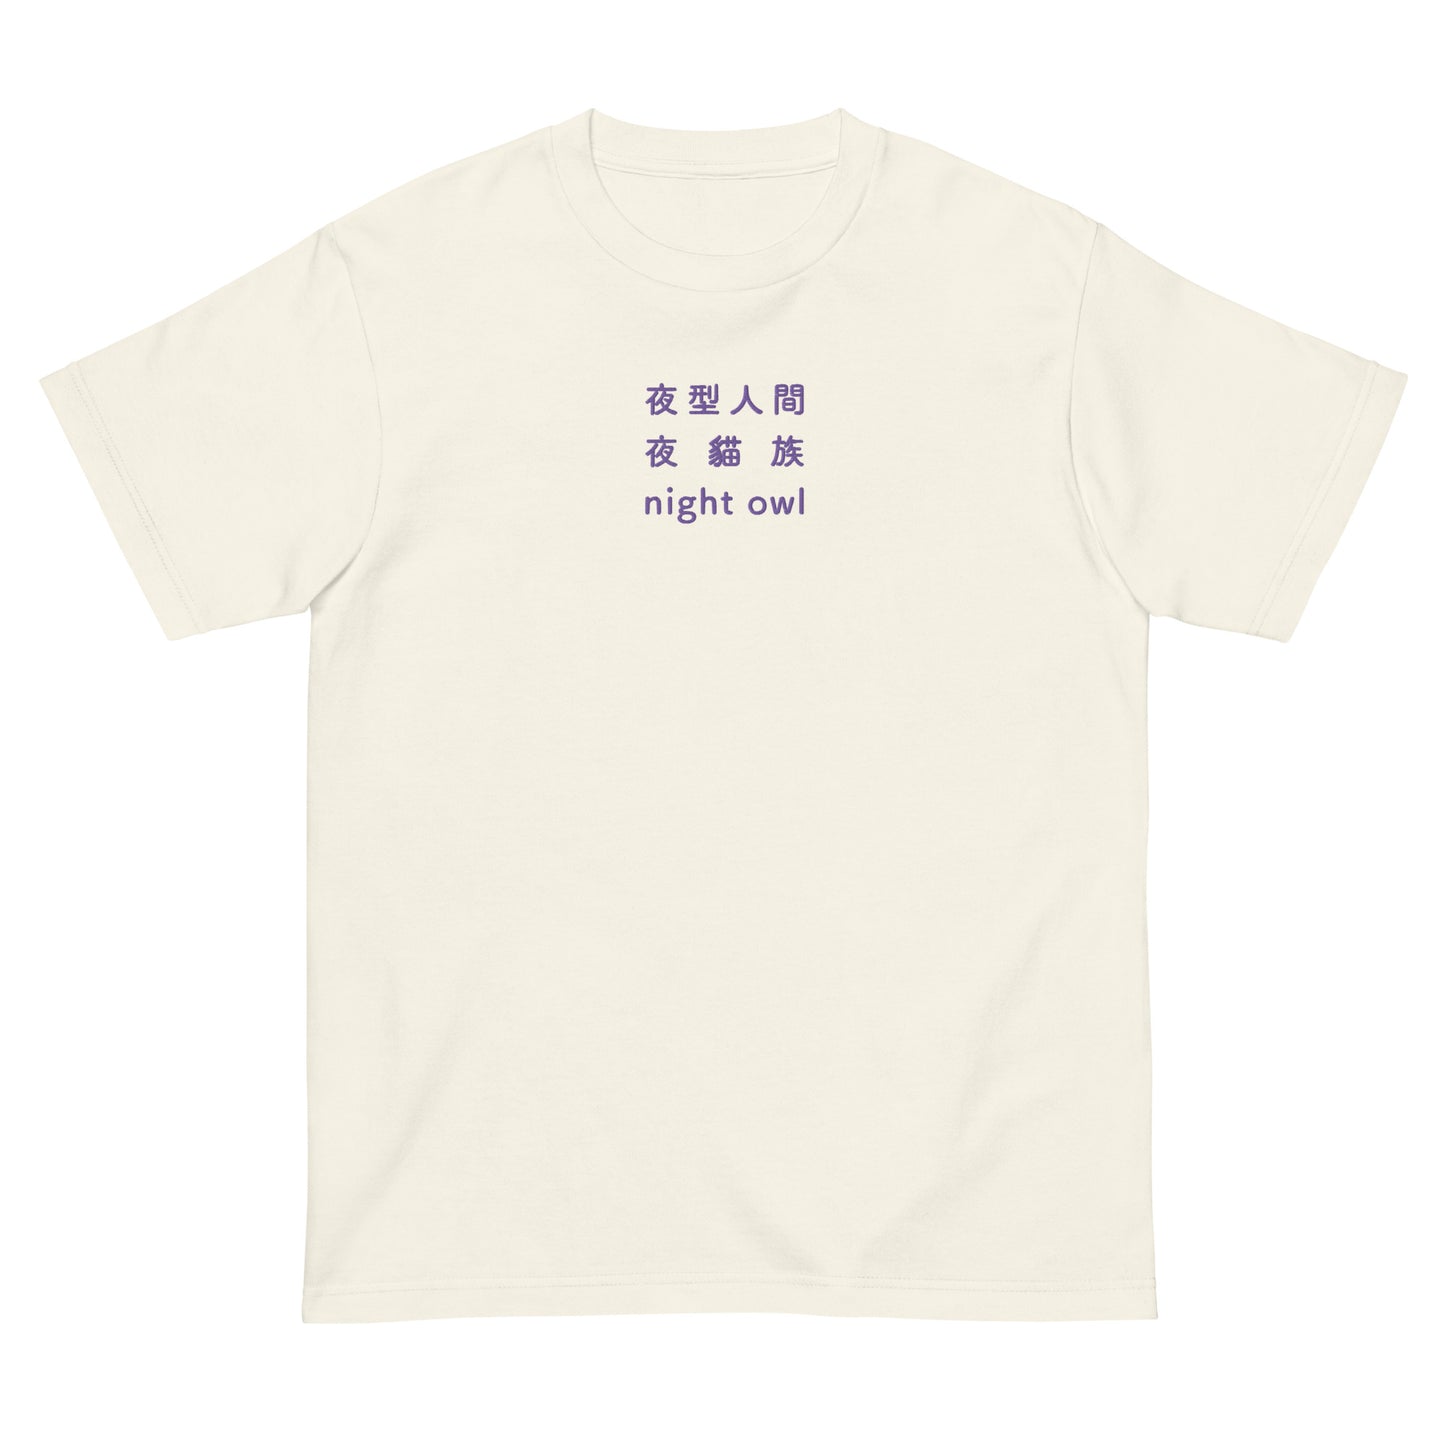 Ivory High Quality Tee - Front Design with an Purple Embroidery "Night Owl" in Japanese,Chinese and English